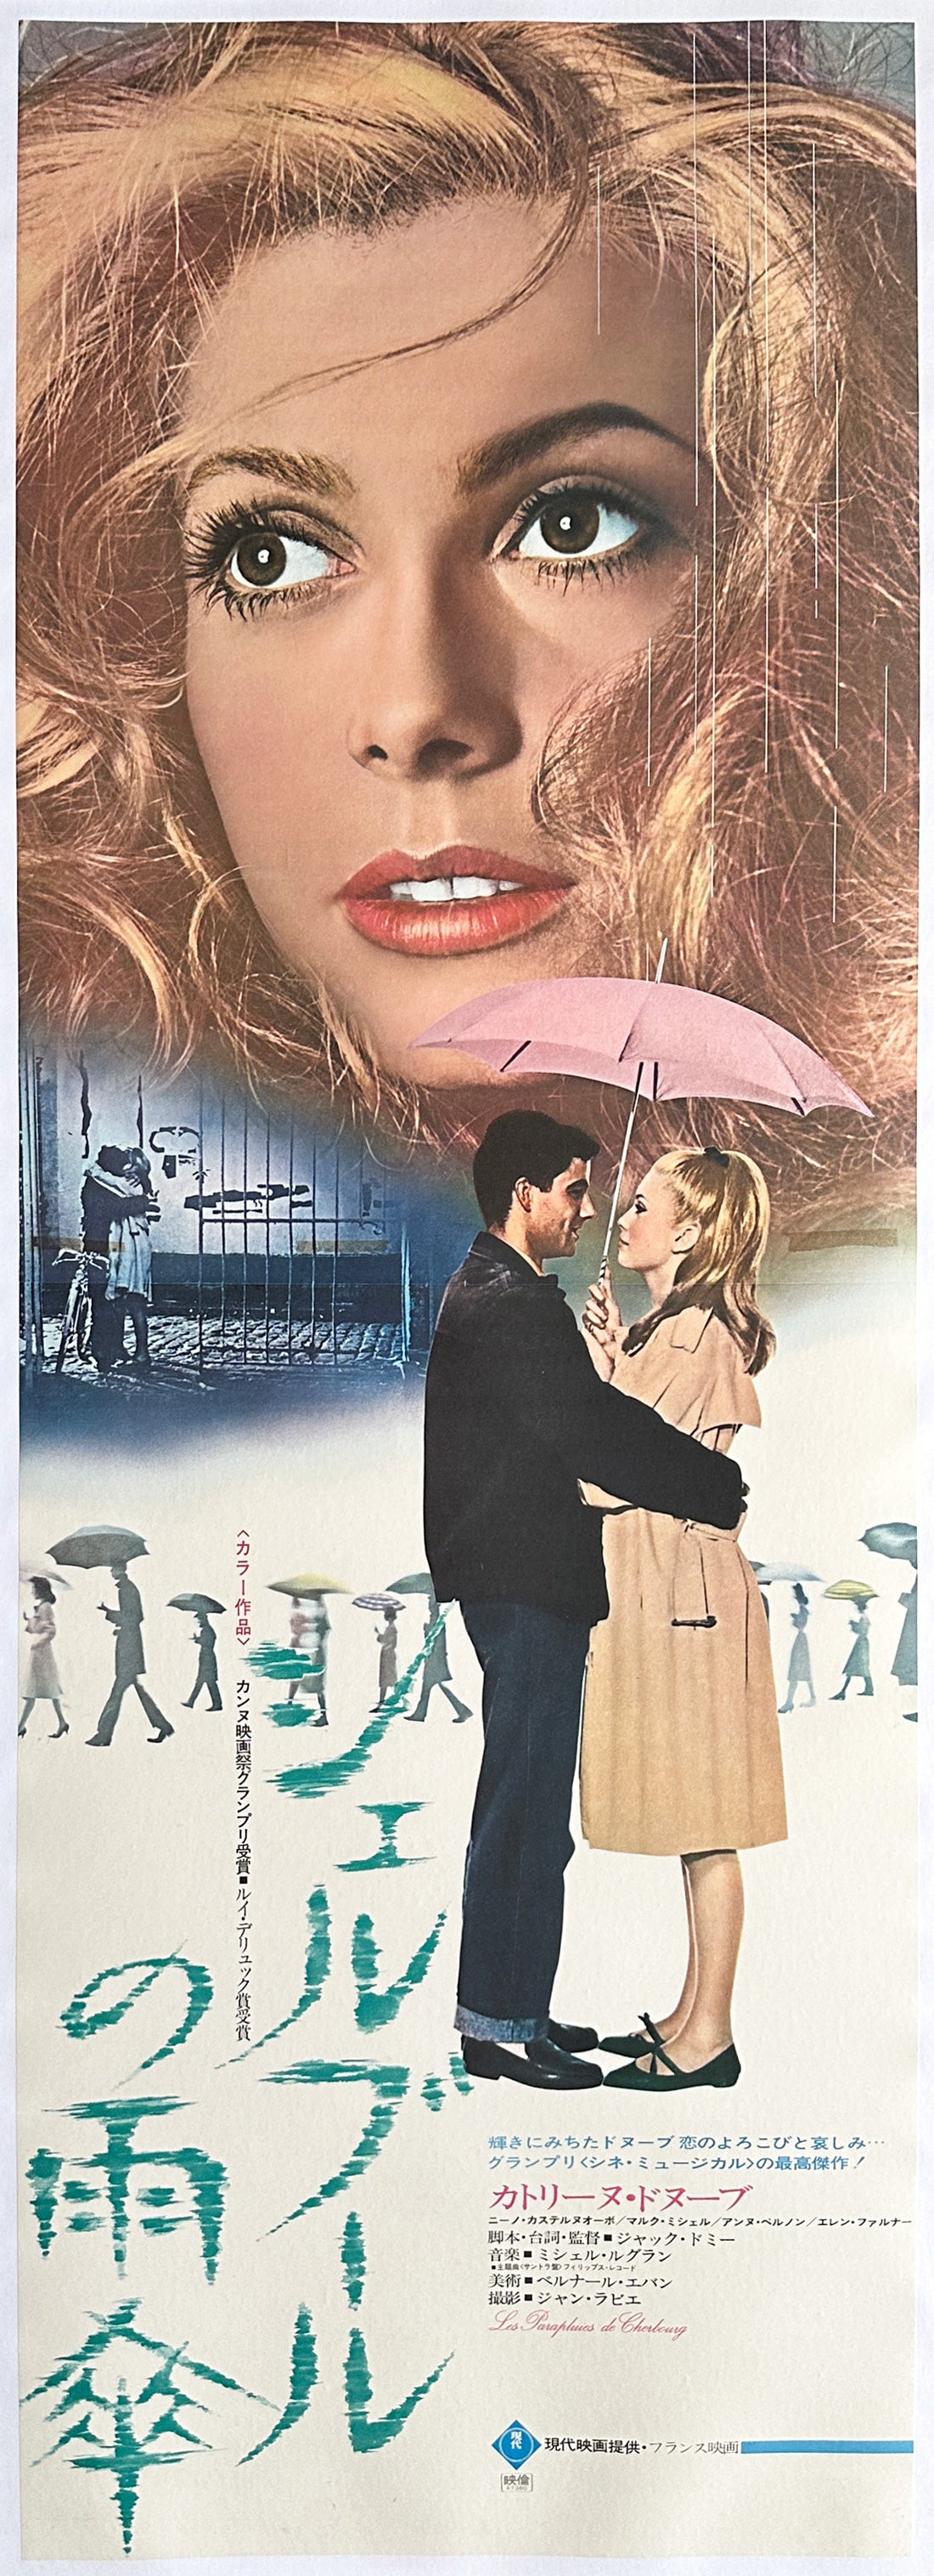 The Umbrellas of Cherbourg R1973 Japanese 2 Sheet Film Movie Poster